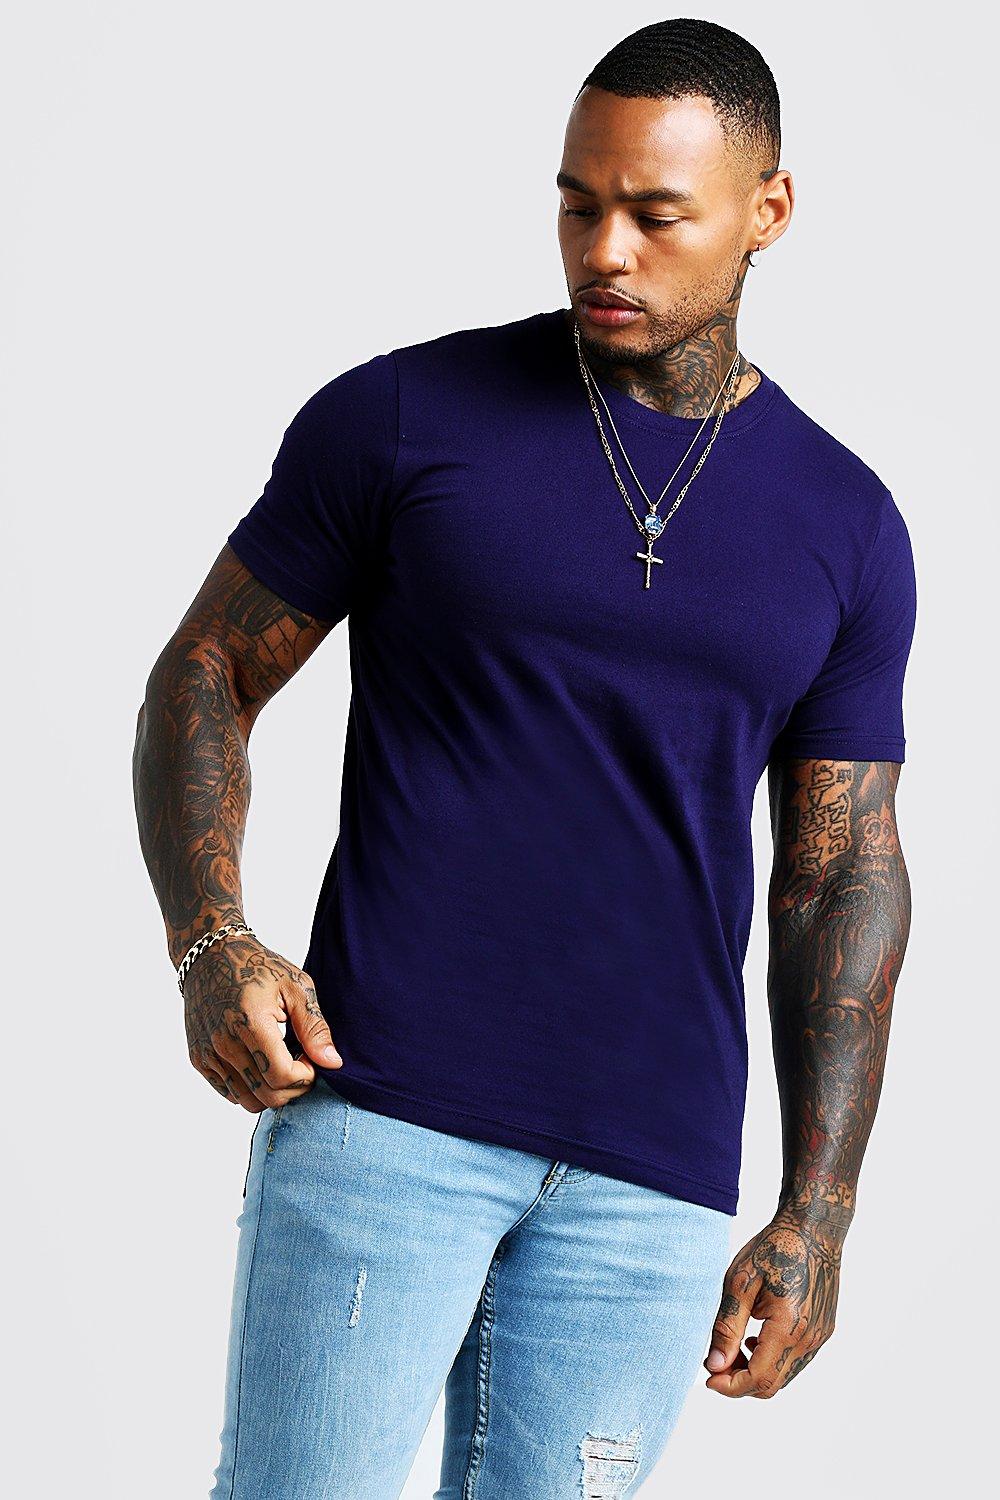 Party Wear For Men | Mens Party Outfits | boohoo UK